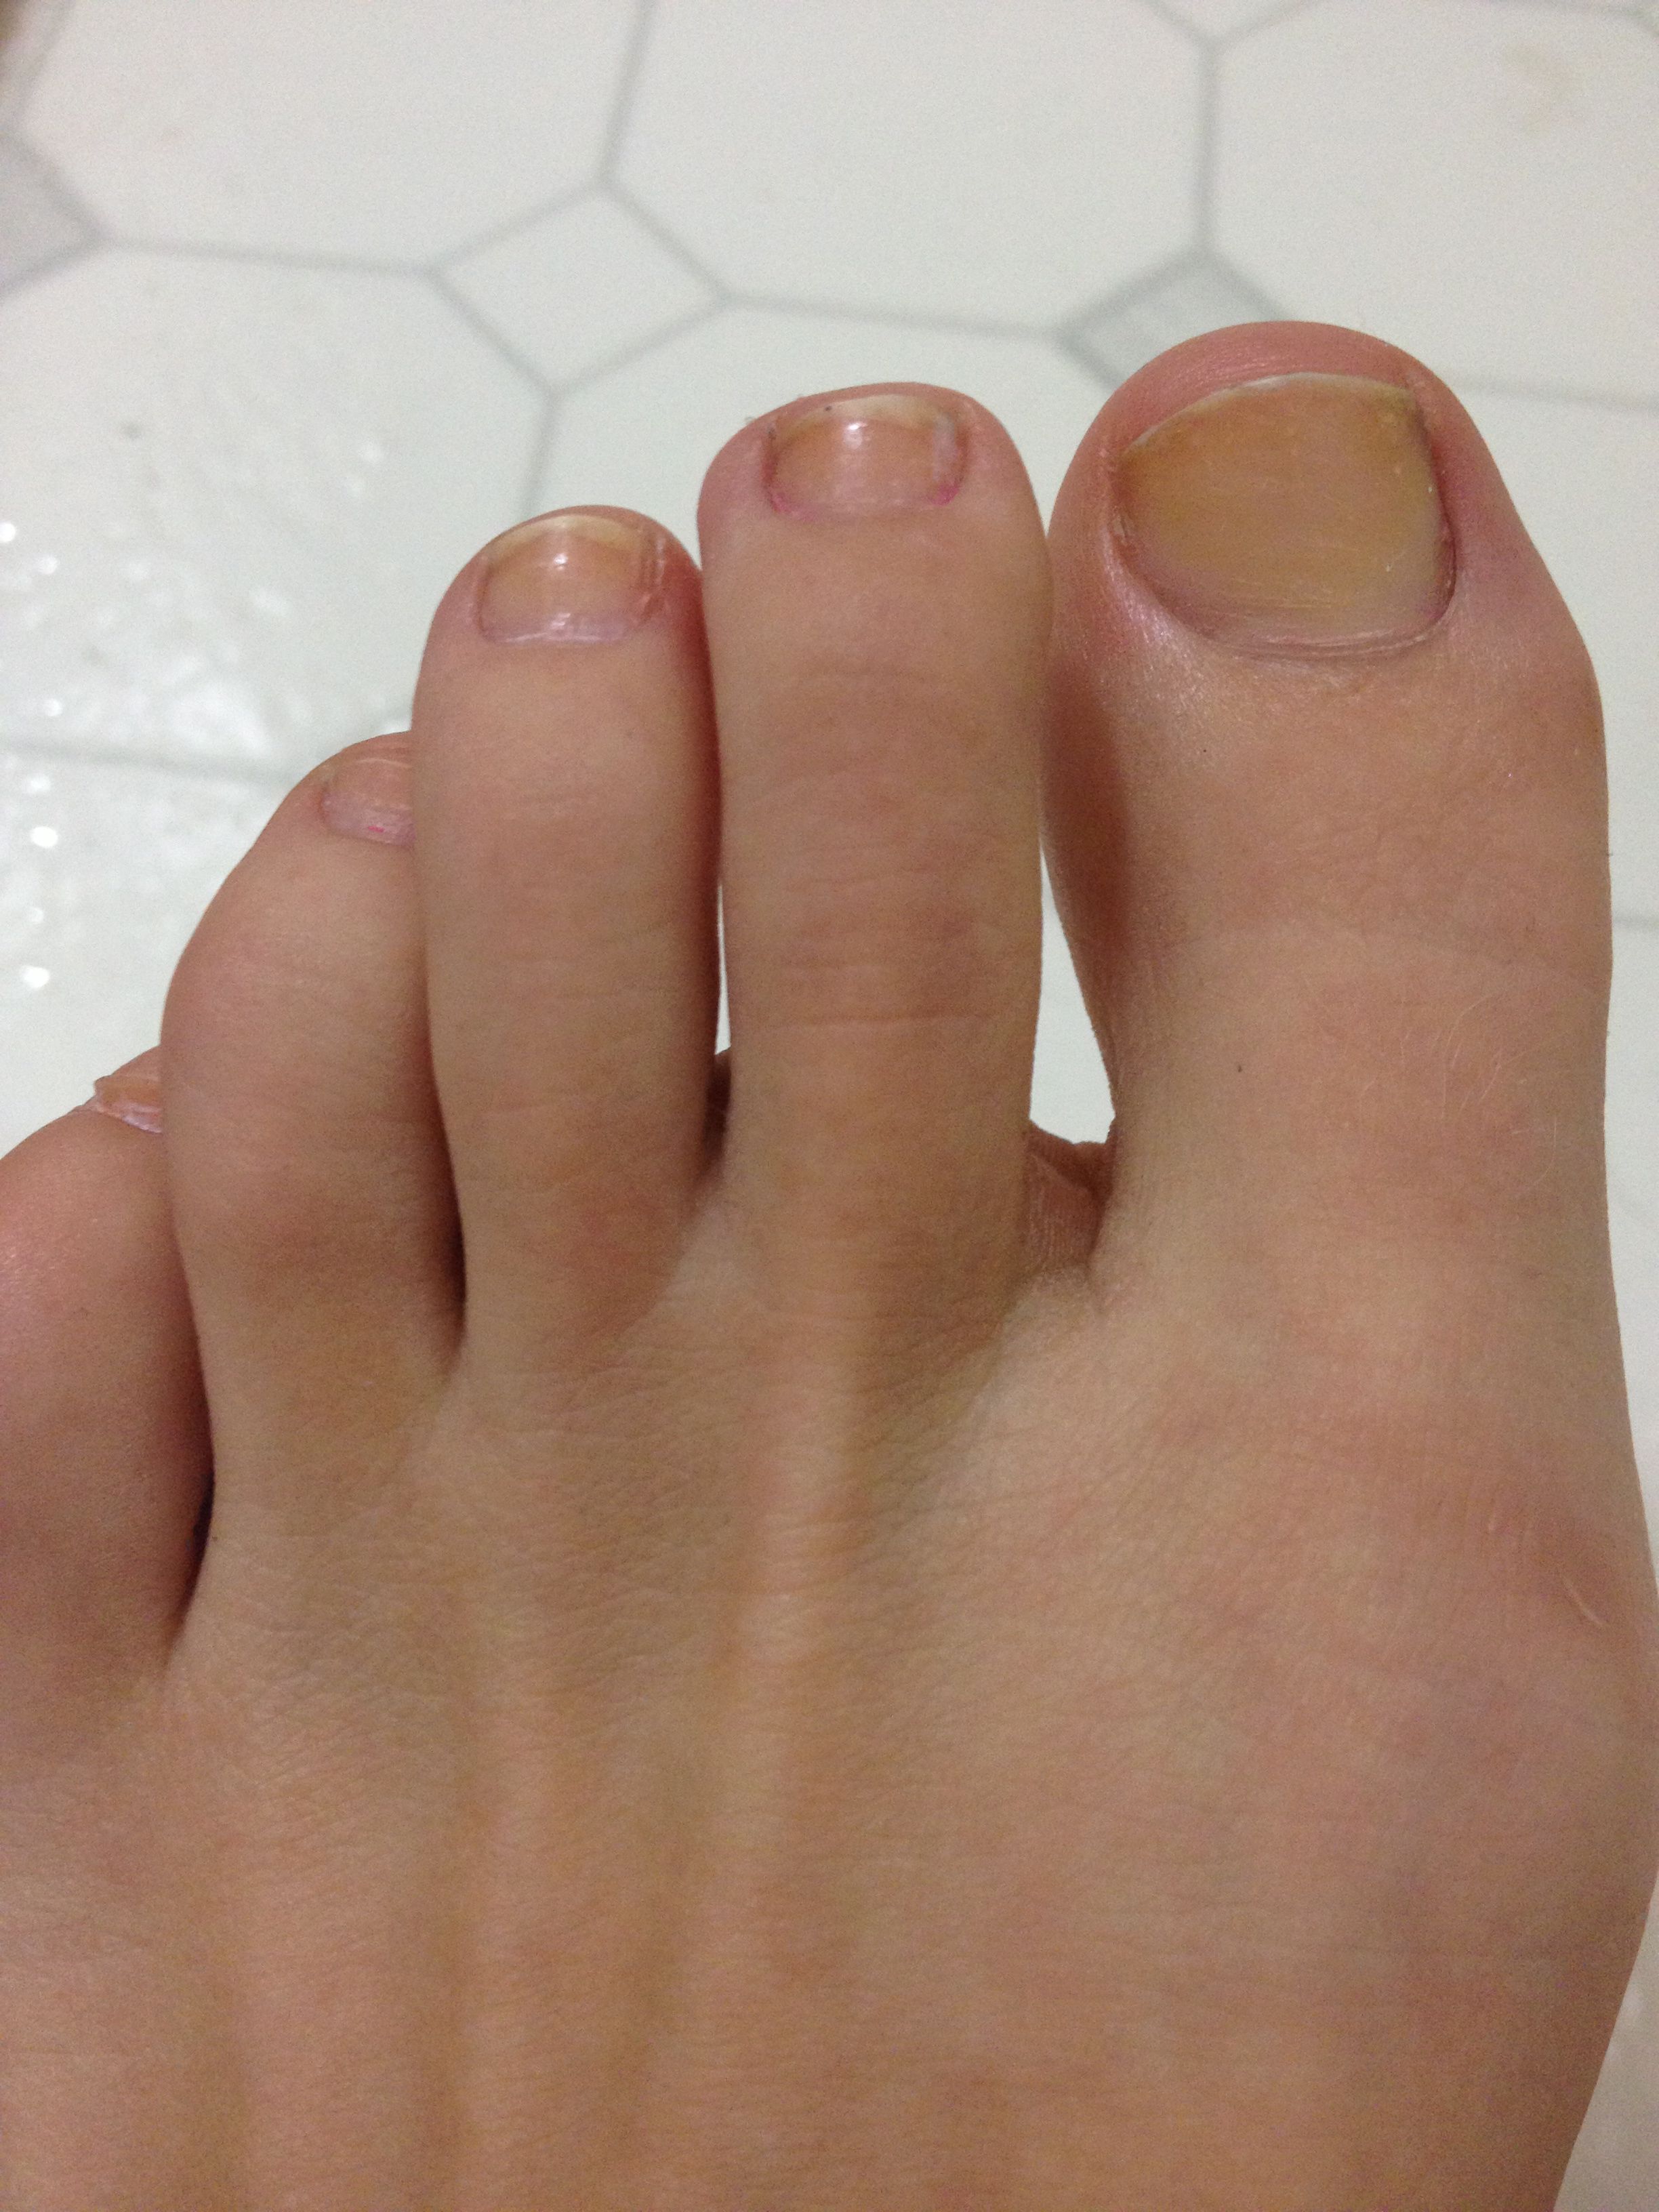 This Is Why Your Toenails Smell So Bad | livestrong